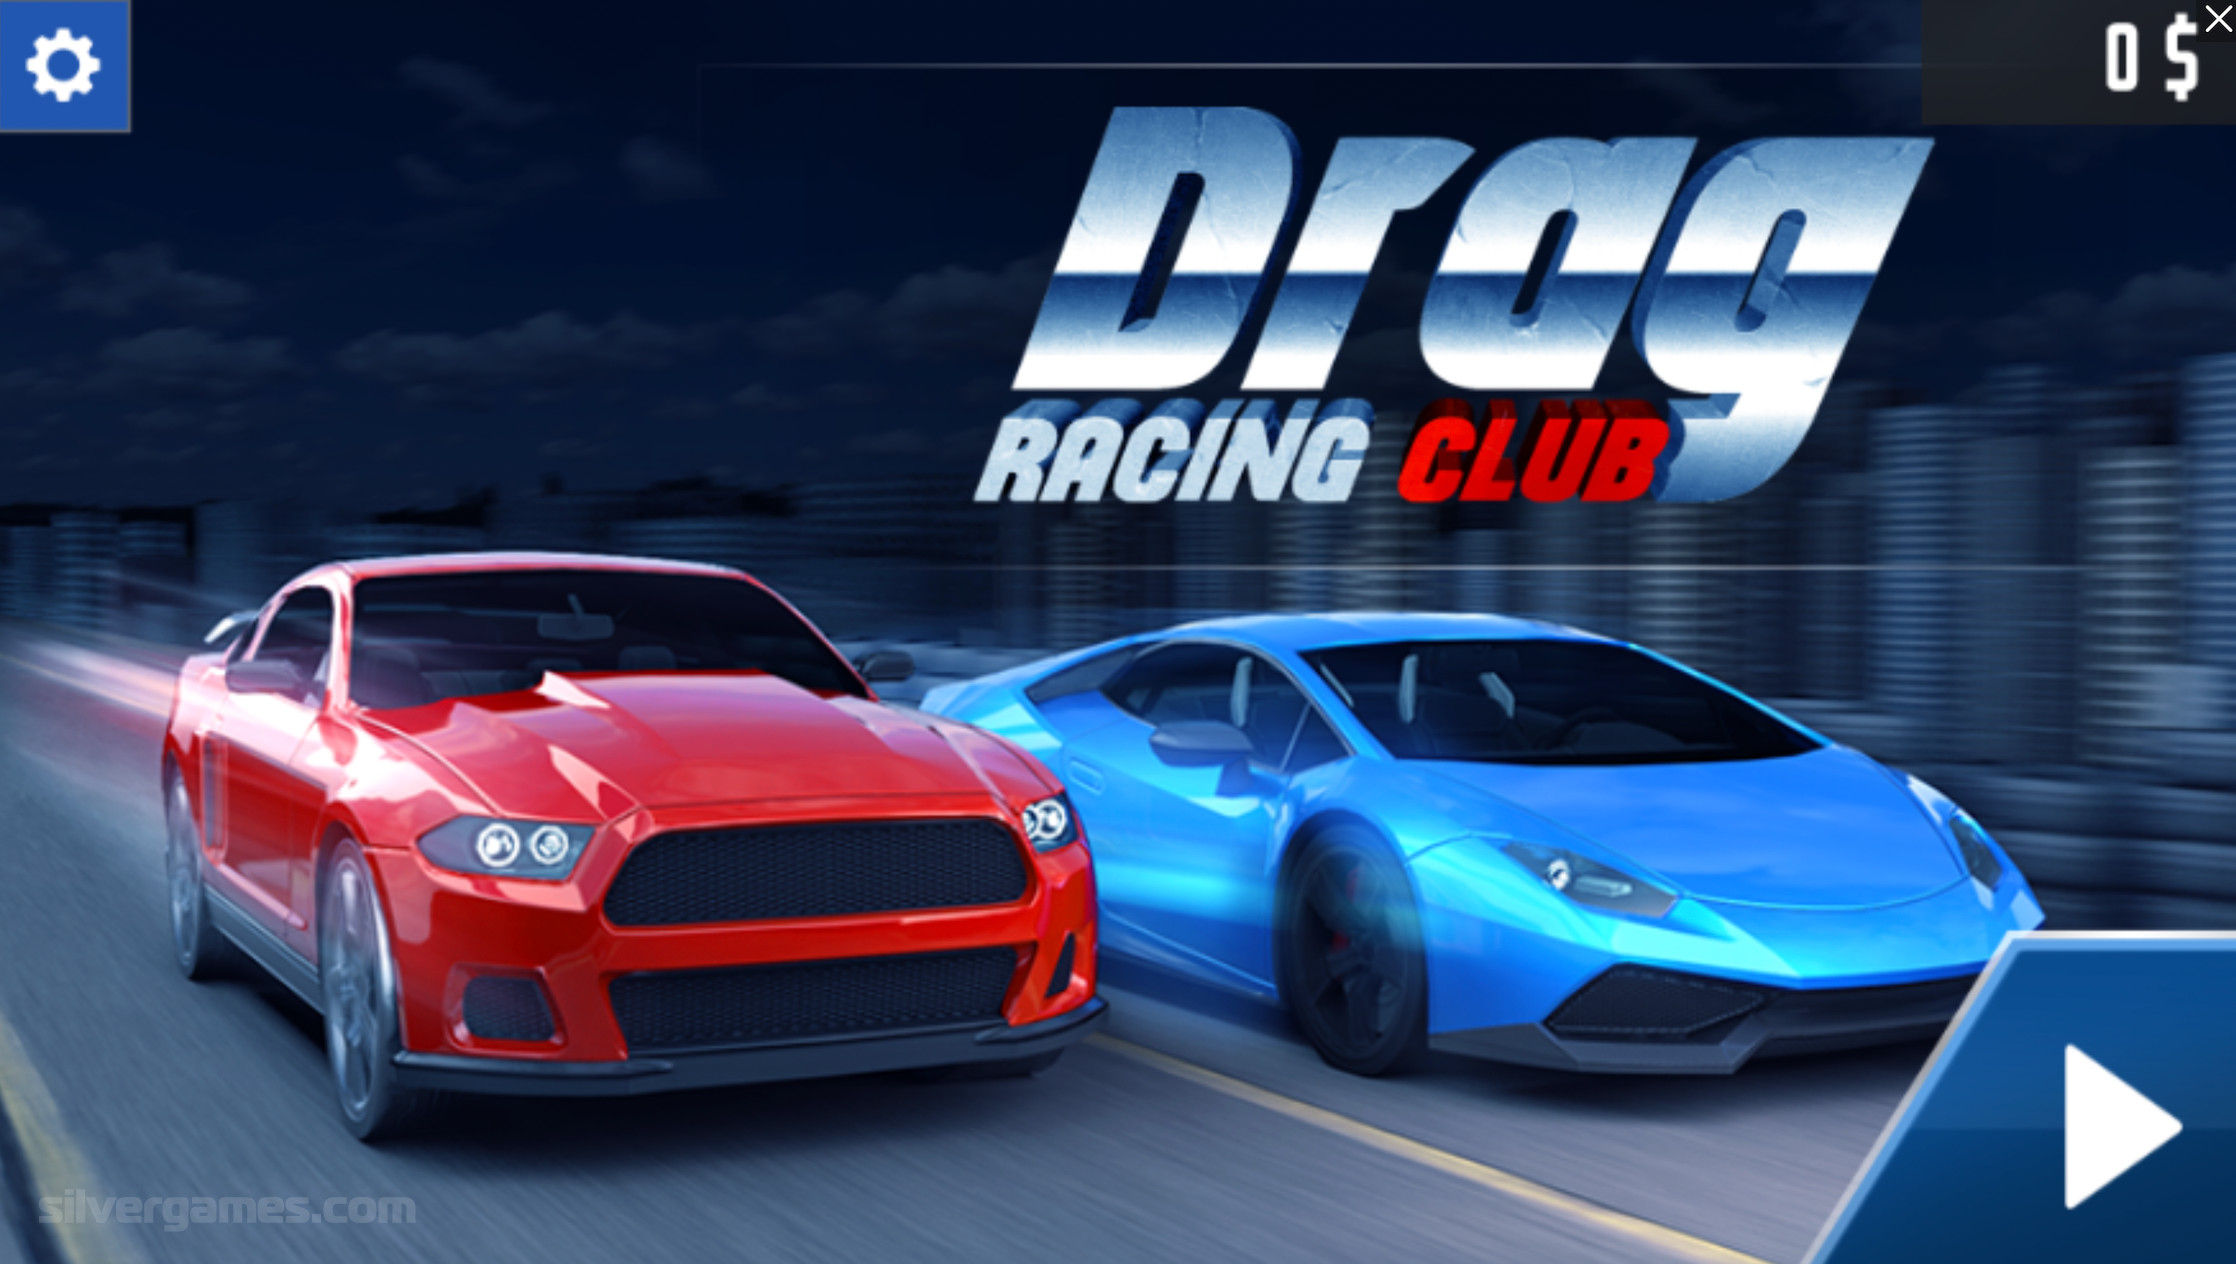 Drag Race 3D - Play Online on SilverGames 🕹️